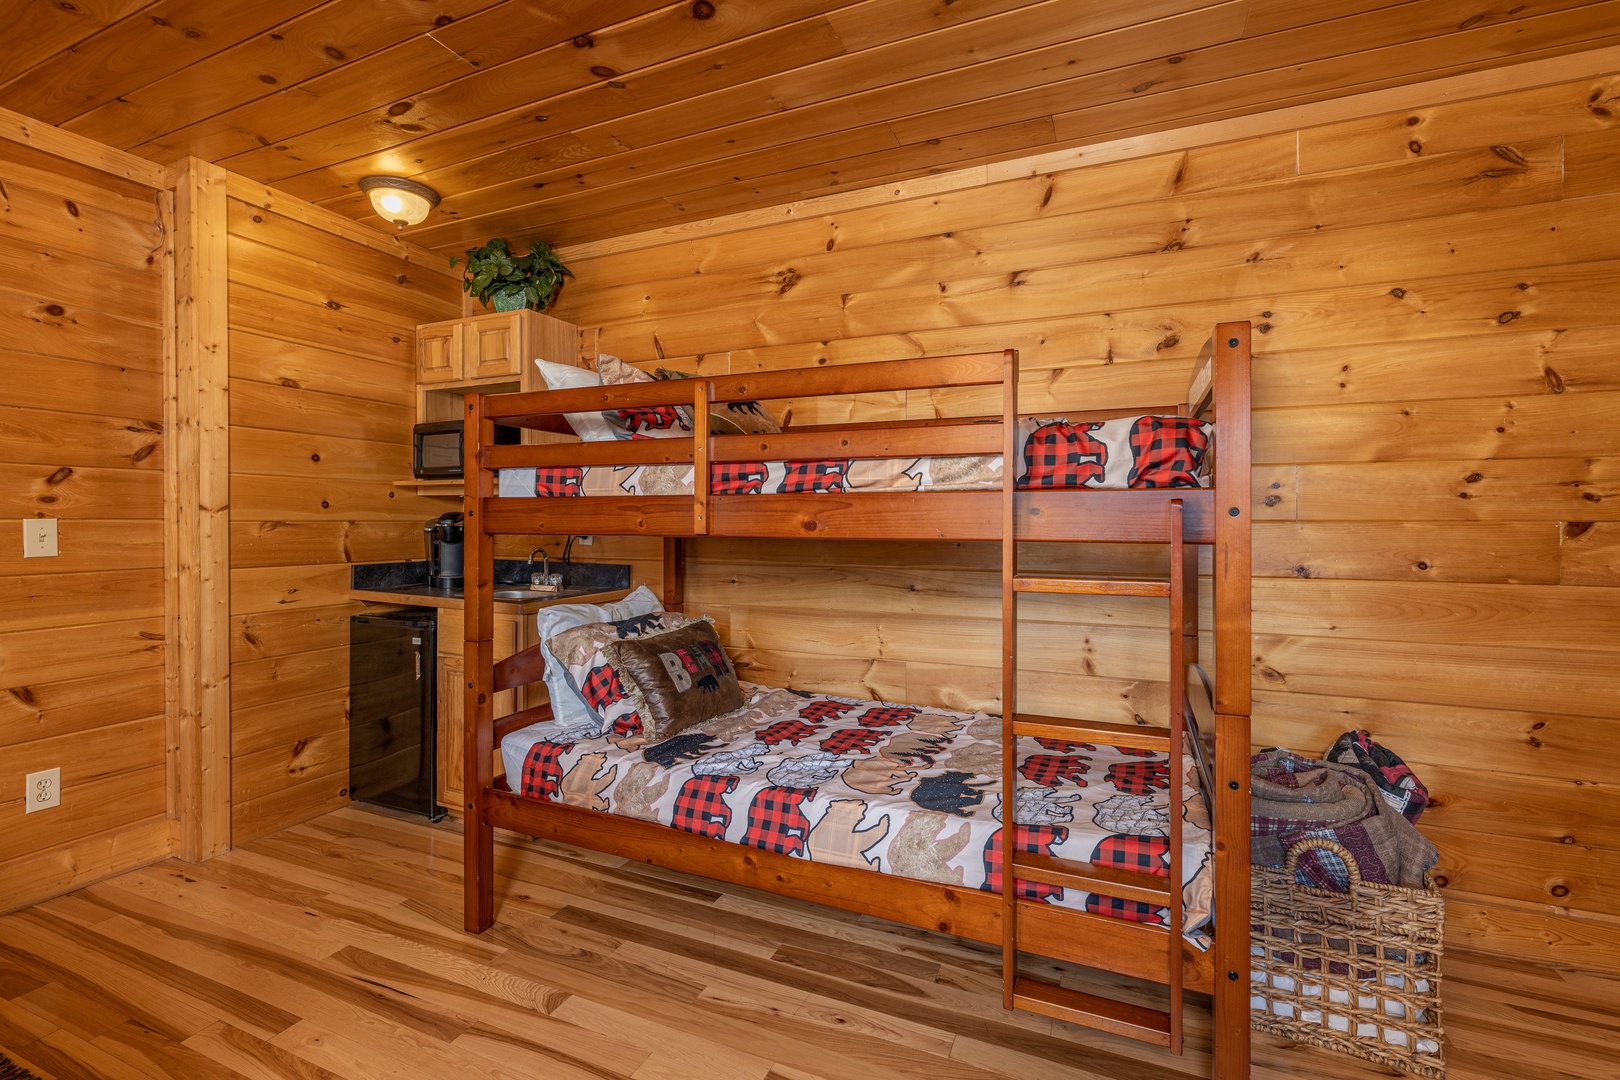 Bunk beds in the game room at Bears Don't Bluff, a 3 bedroom cabin rental located in Pigeon Forge